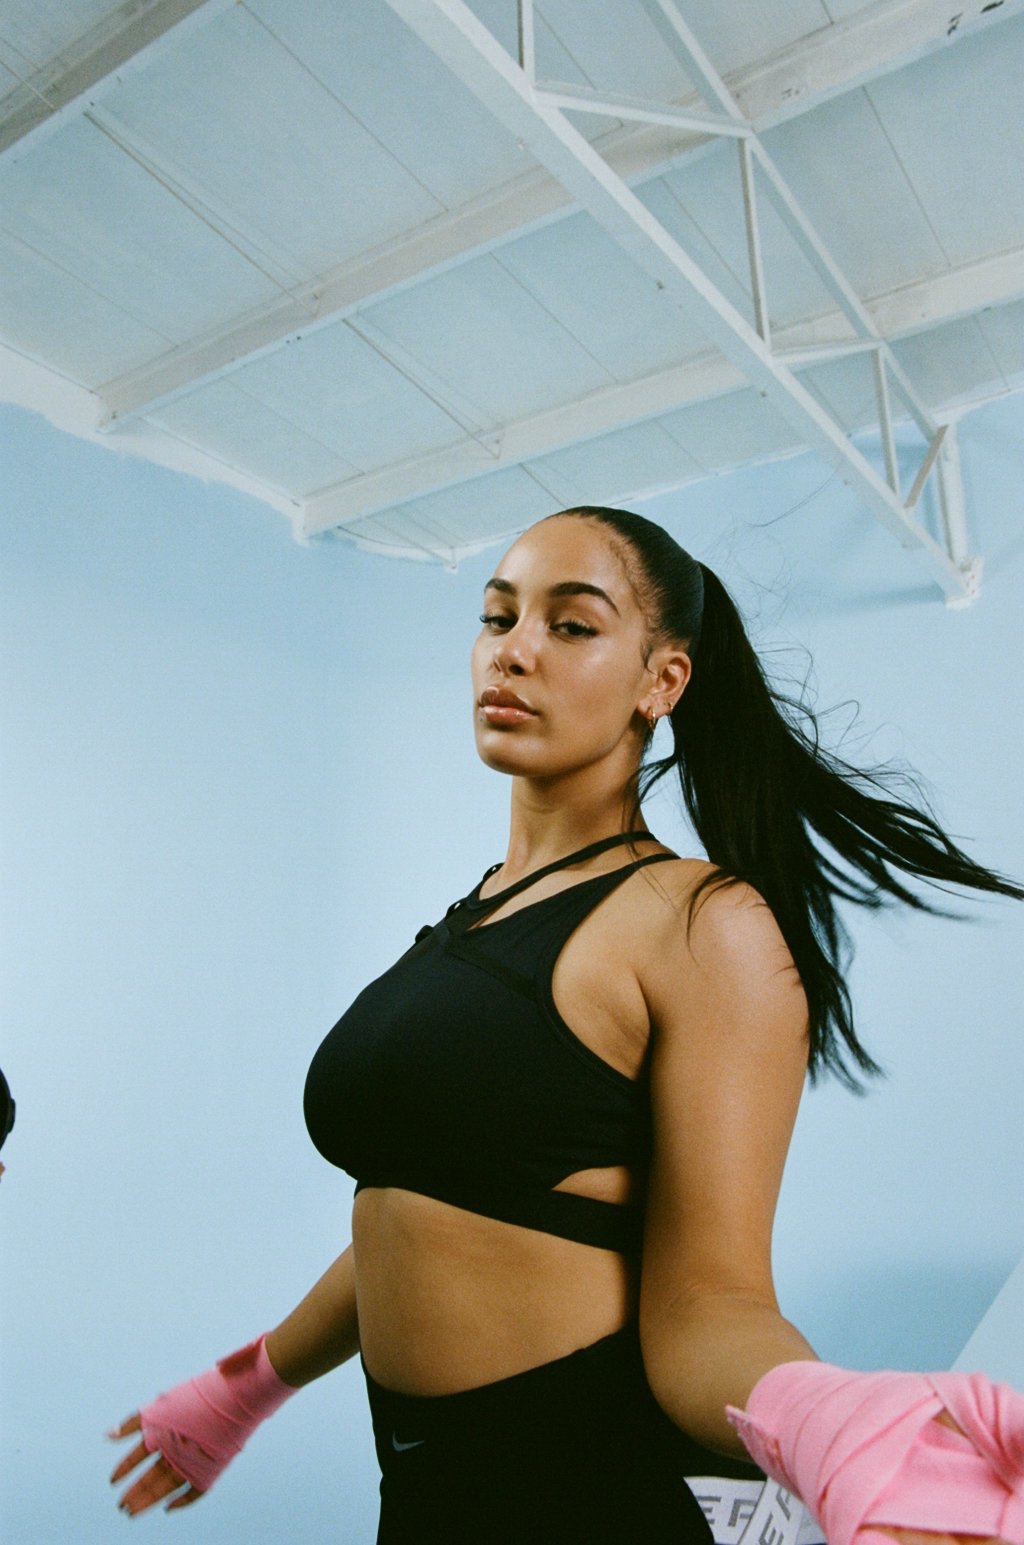 Nike x Invitation to Sport Campaign, 2019. Featuring Jorja Smith.